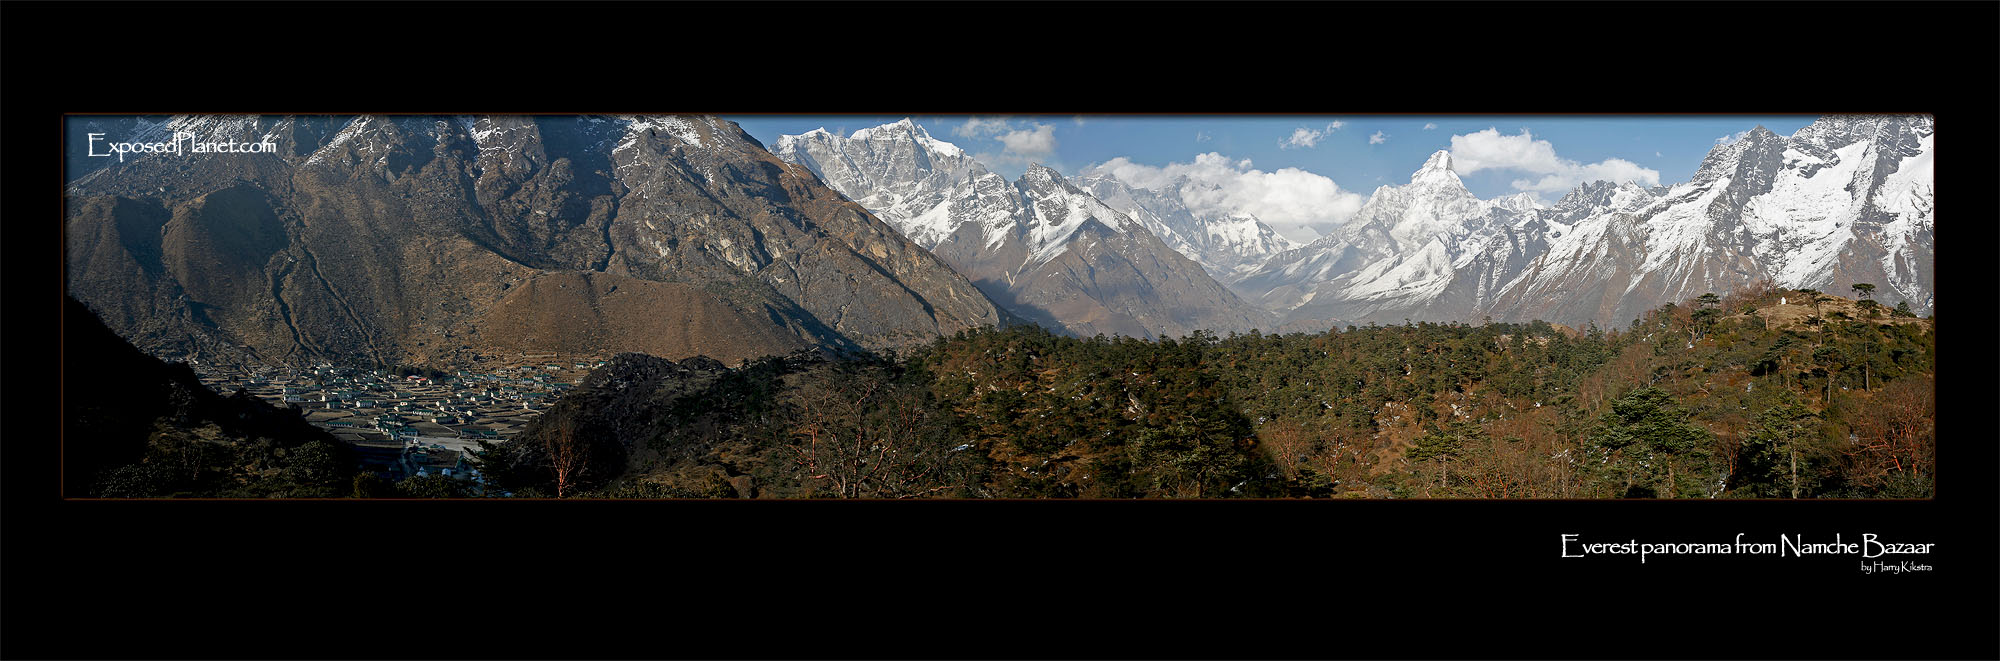 Panorama of Nepalese Himalaya with Everest from Namche Bazaar